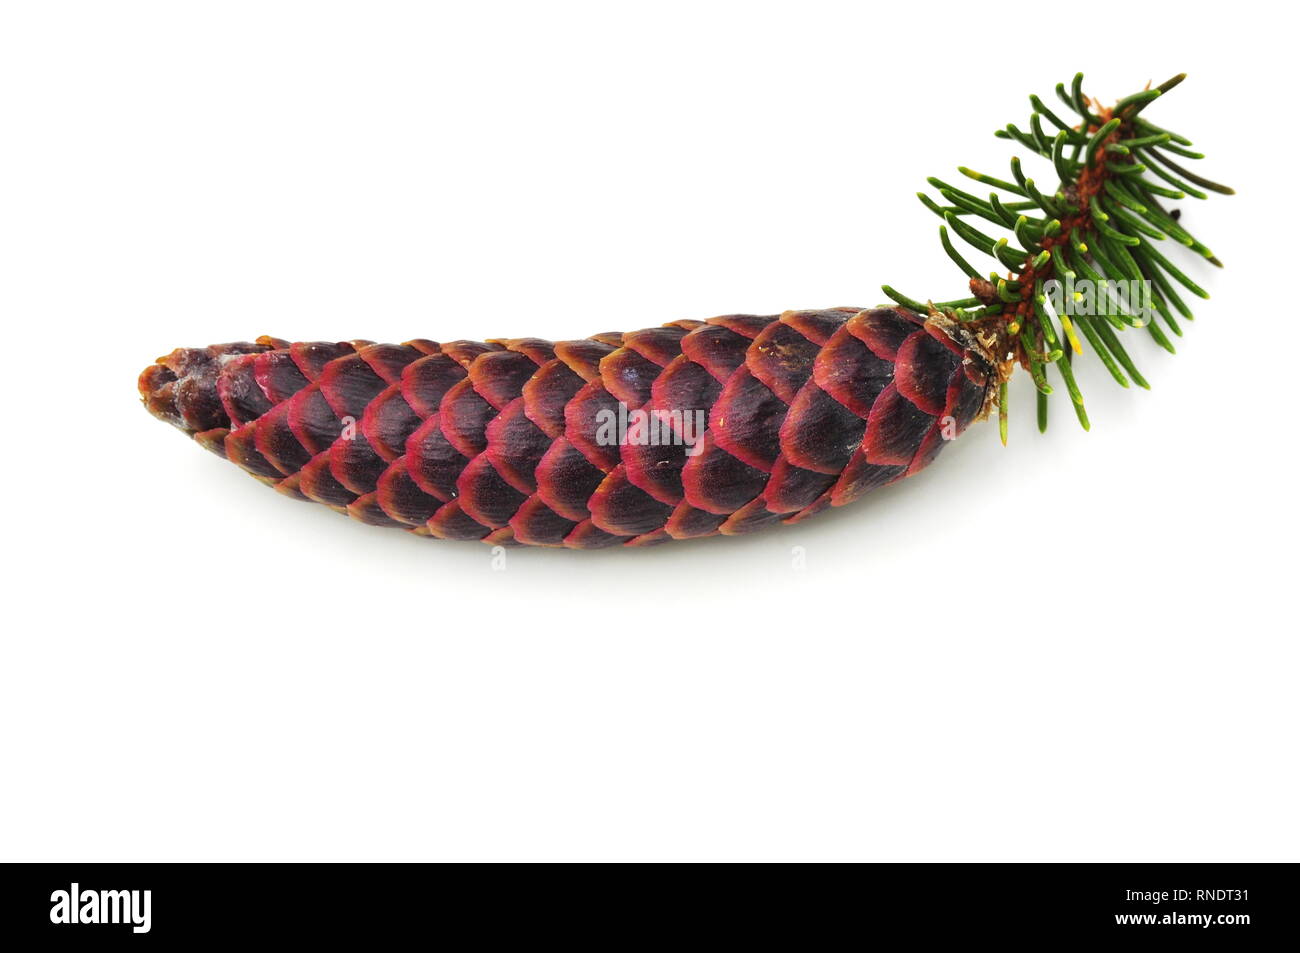 Young fir cone isolated on white background Stock Photo